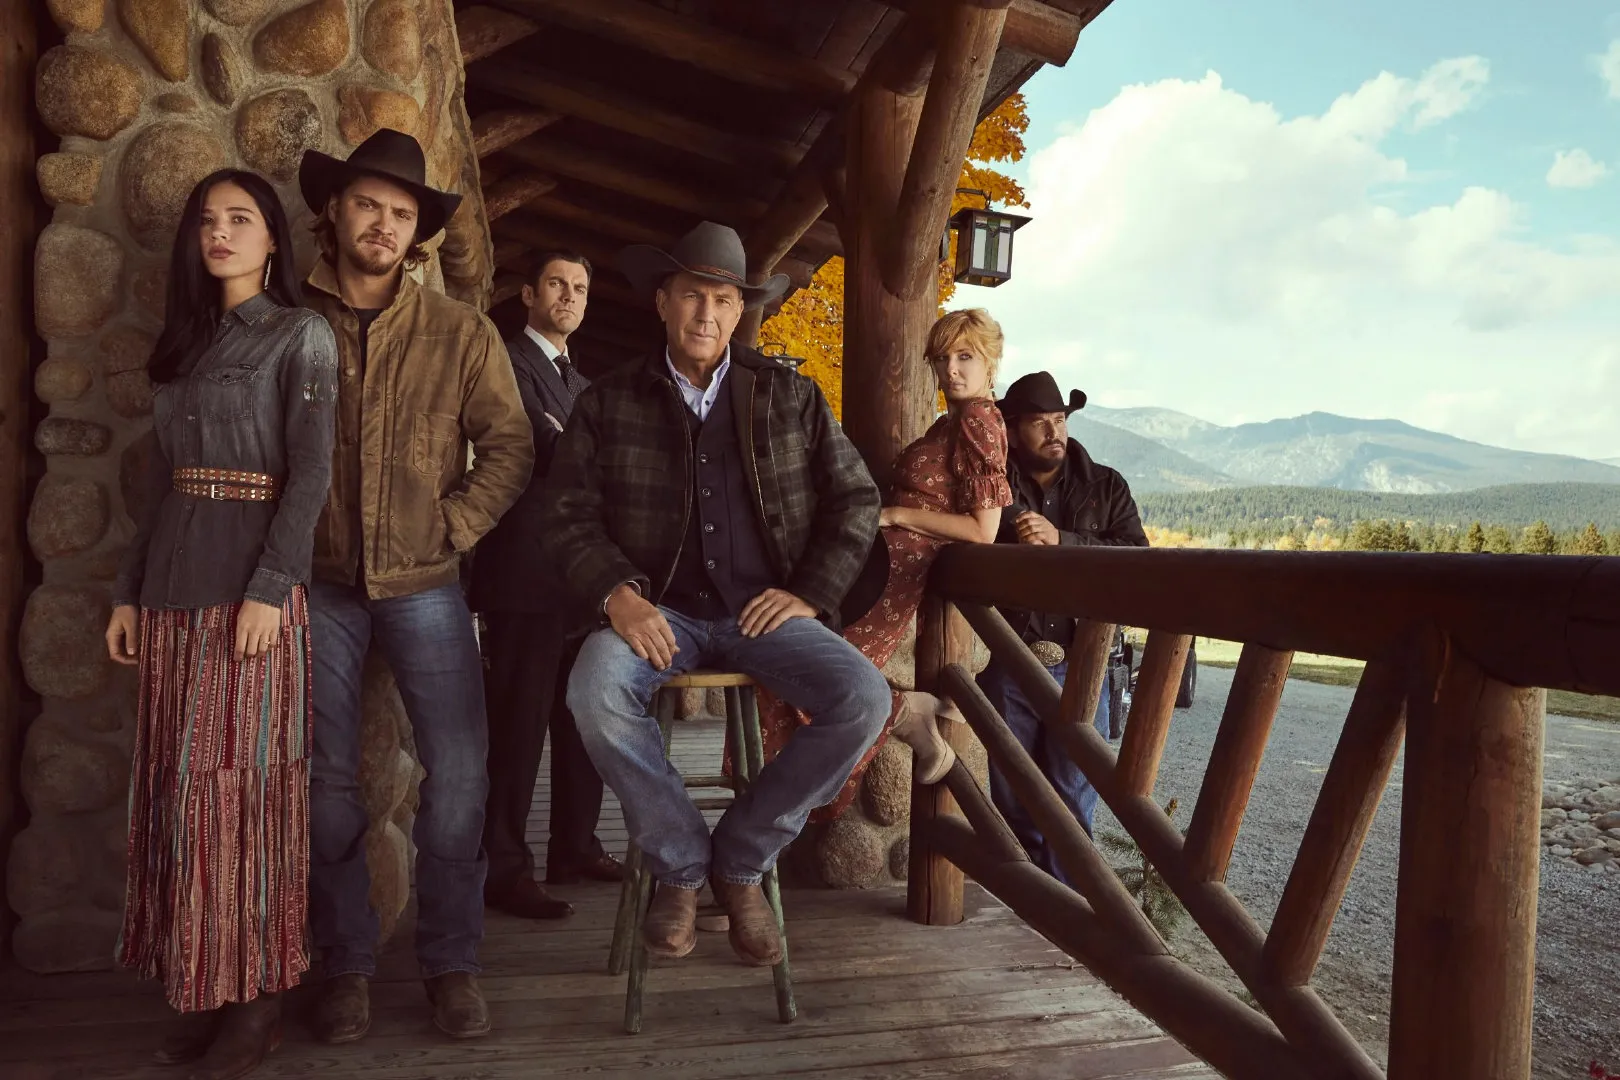 'Yellowstone' prequel drama '1923' has started filming, multiple new cast announced | FMV6